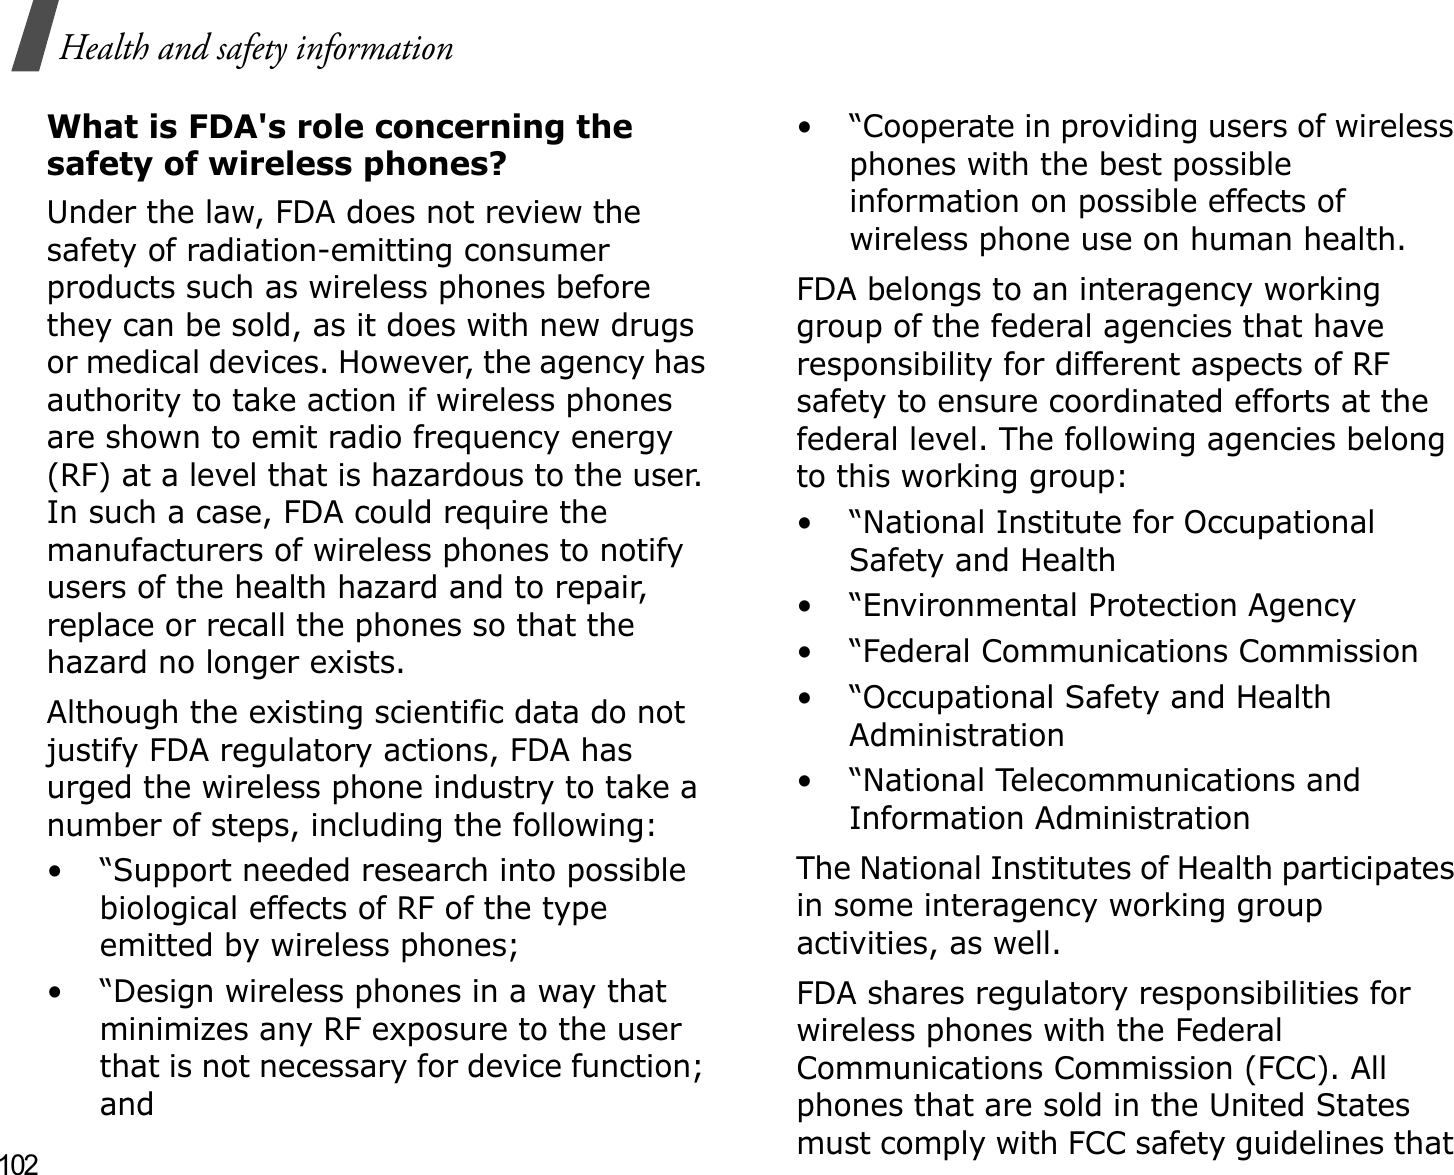 102Health and safety informationWhat is FDA&apos;s role concerning the safety of wireless phones?Under the law, FDA does not review the safety of radiation-emitting consumer products such as wireless phones before they can be sold, as it does with new drugs or medical devices. However, the agency has authority to take action if wireless phones are shown to emit radio frequency energy (RF) at a level that is hazardous to the user. In such a case, FDA could require the manufacturers of wireless phones to notify users of the health hazard and to repair, replace or recall the phones so that the hazard no longer exists.Although the existing scientific data do not justify FDA regulatory actions, FDA has urged the wireless phone industry to take a number of steps, including the following:• “Support needed research into possible biological effects of RF of the type emitted by wireless phones;• “Design wireless phones in a way that minimizes any RF exposure to the user that is not necessary for device function; and• “Cooperate in providing users of wireless phones with the best possible information on possible effects of wireless phone use on human health.FDA belongs to an interagency working group of the federal agencies that have responsibility for different aspects of RF safety to ensure coordinated efforts at the federal level. The following agencies belong to this working group:• “National Institute for Occupational Safety and Health• “Environmental Protection Agency• “Federal Communications Commission• “Occupational Safety and Health Administration• “National Telecommunications and Information AdministrationThe National Institutes of Health participates in some interagency working group activities, as well.FDA shares regulatory responsibilities for wireless phones with the Federal Communications Commission (FCC). All phones that are sold in the United States must comply with FCC safety guidelines that 